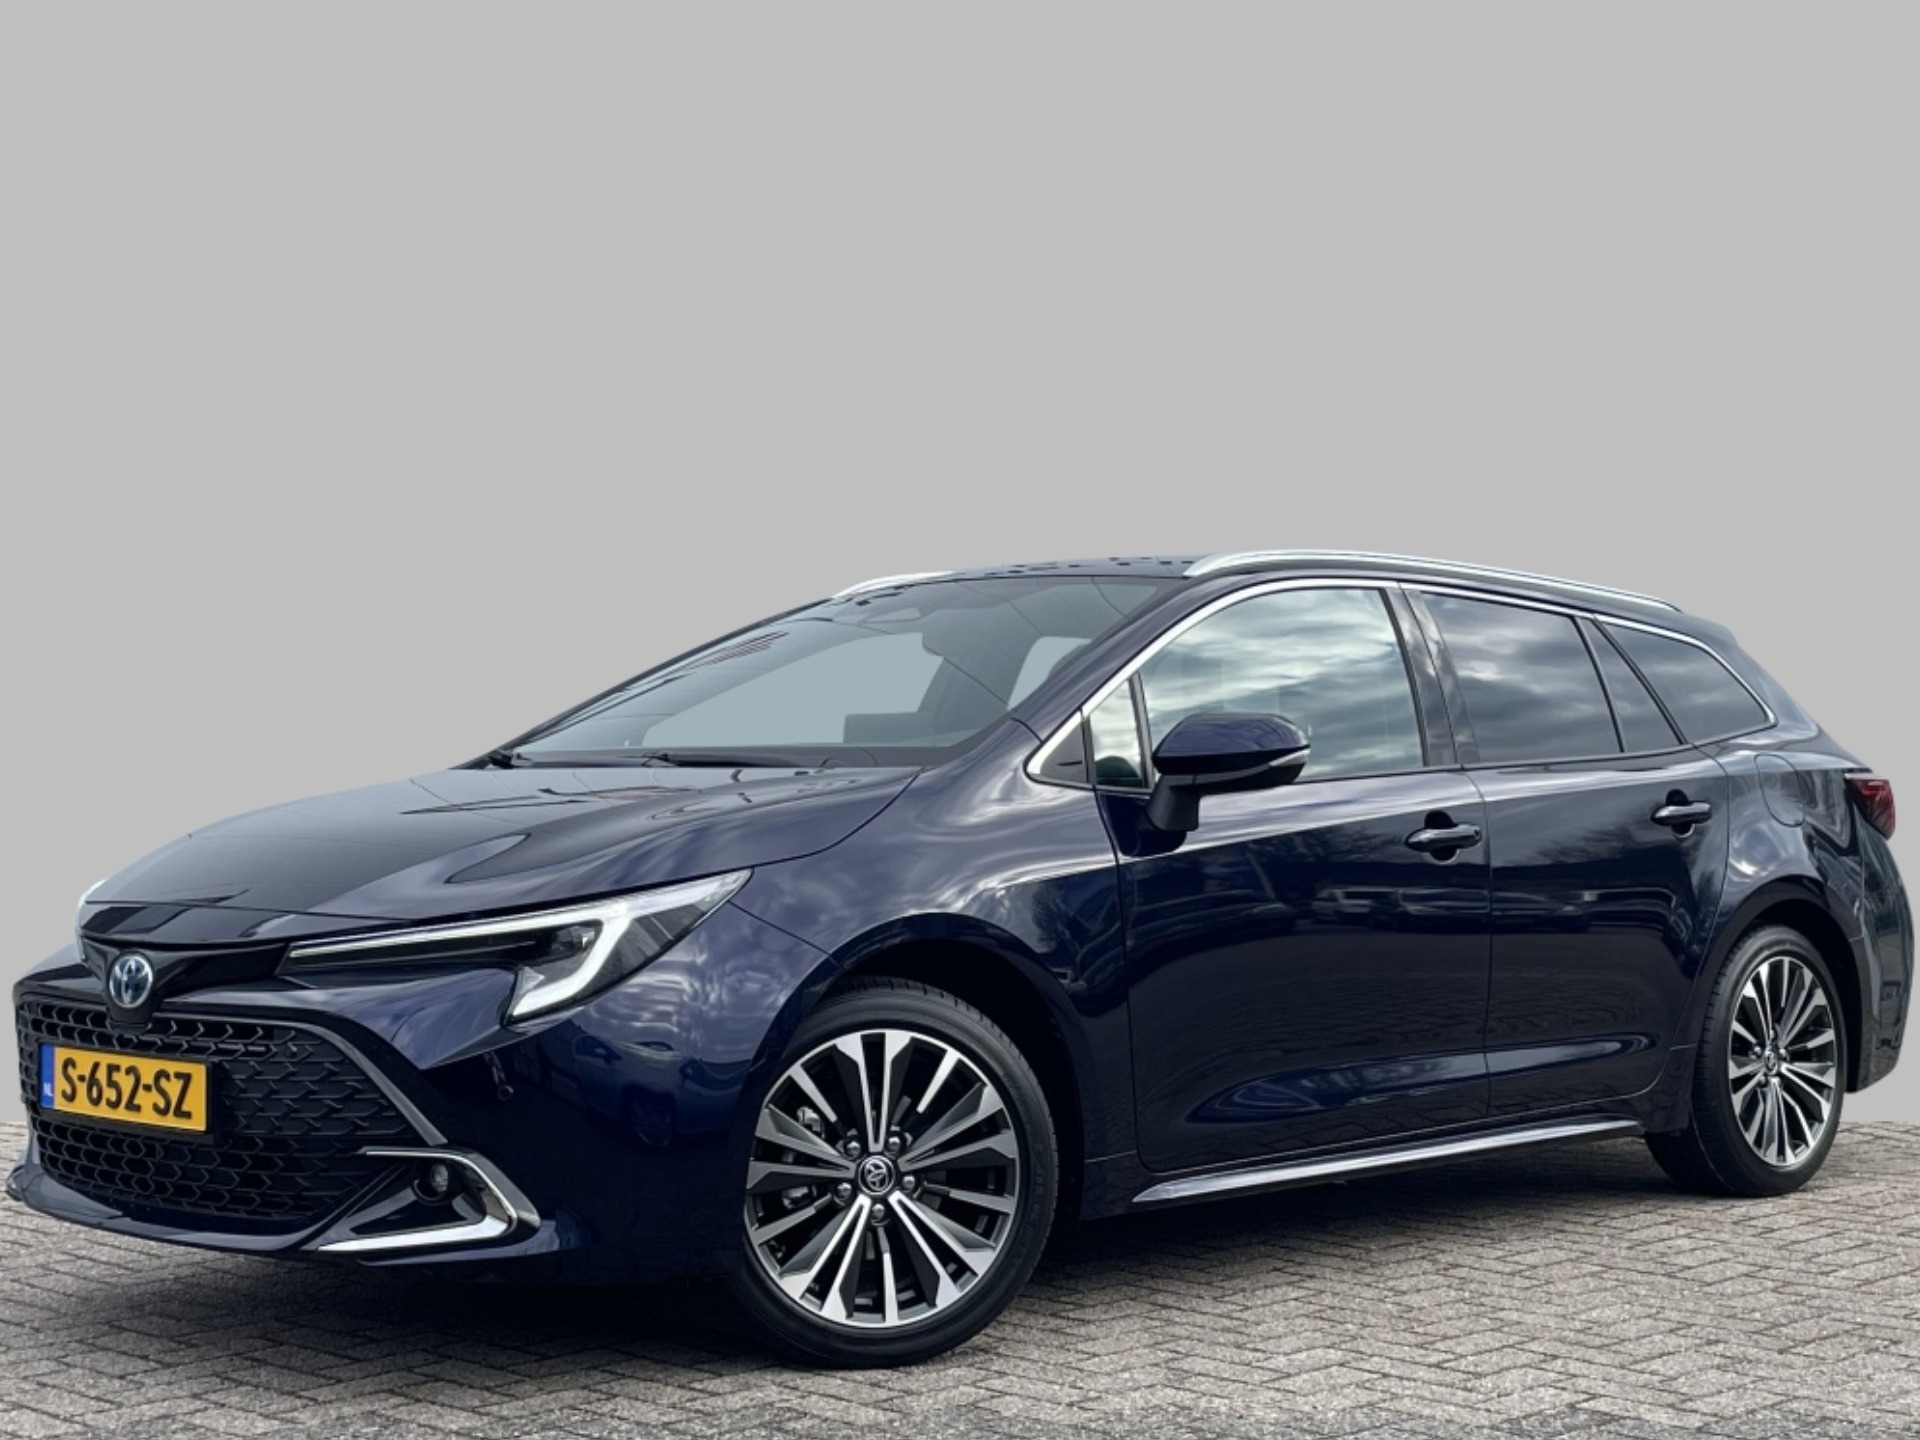 Toyota Corolla Touring Sports 1.8 Hybrid First Edition Automaat 140PK Demo Navi Cruise PDC Cli